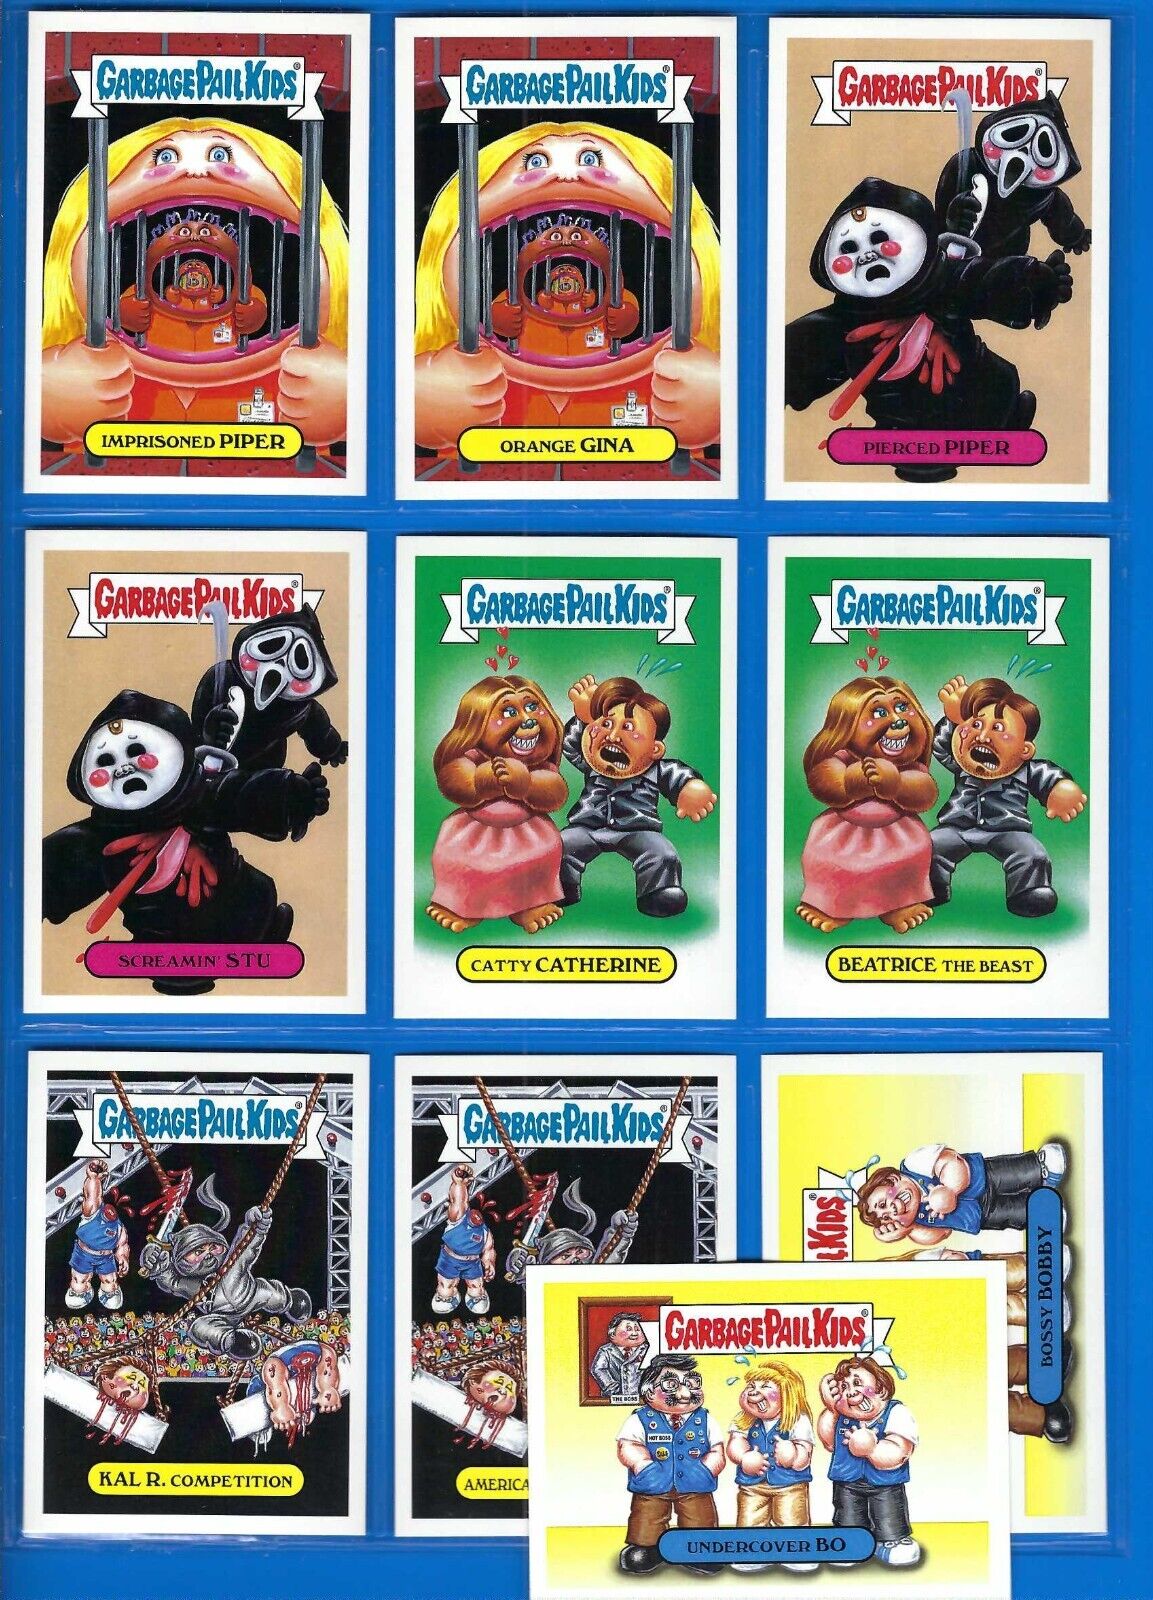 2016 GARBAGE PAIL KIDS PRIME SLIME TRASHY TV SUMMER PREVIEW COMPLETE SET OF 10